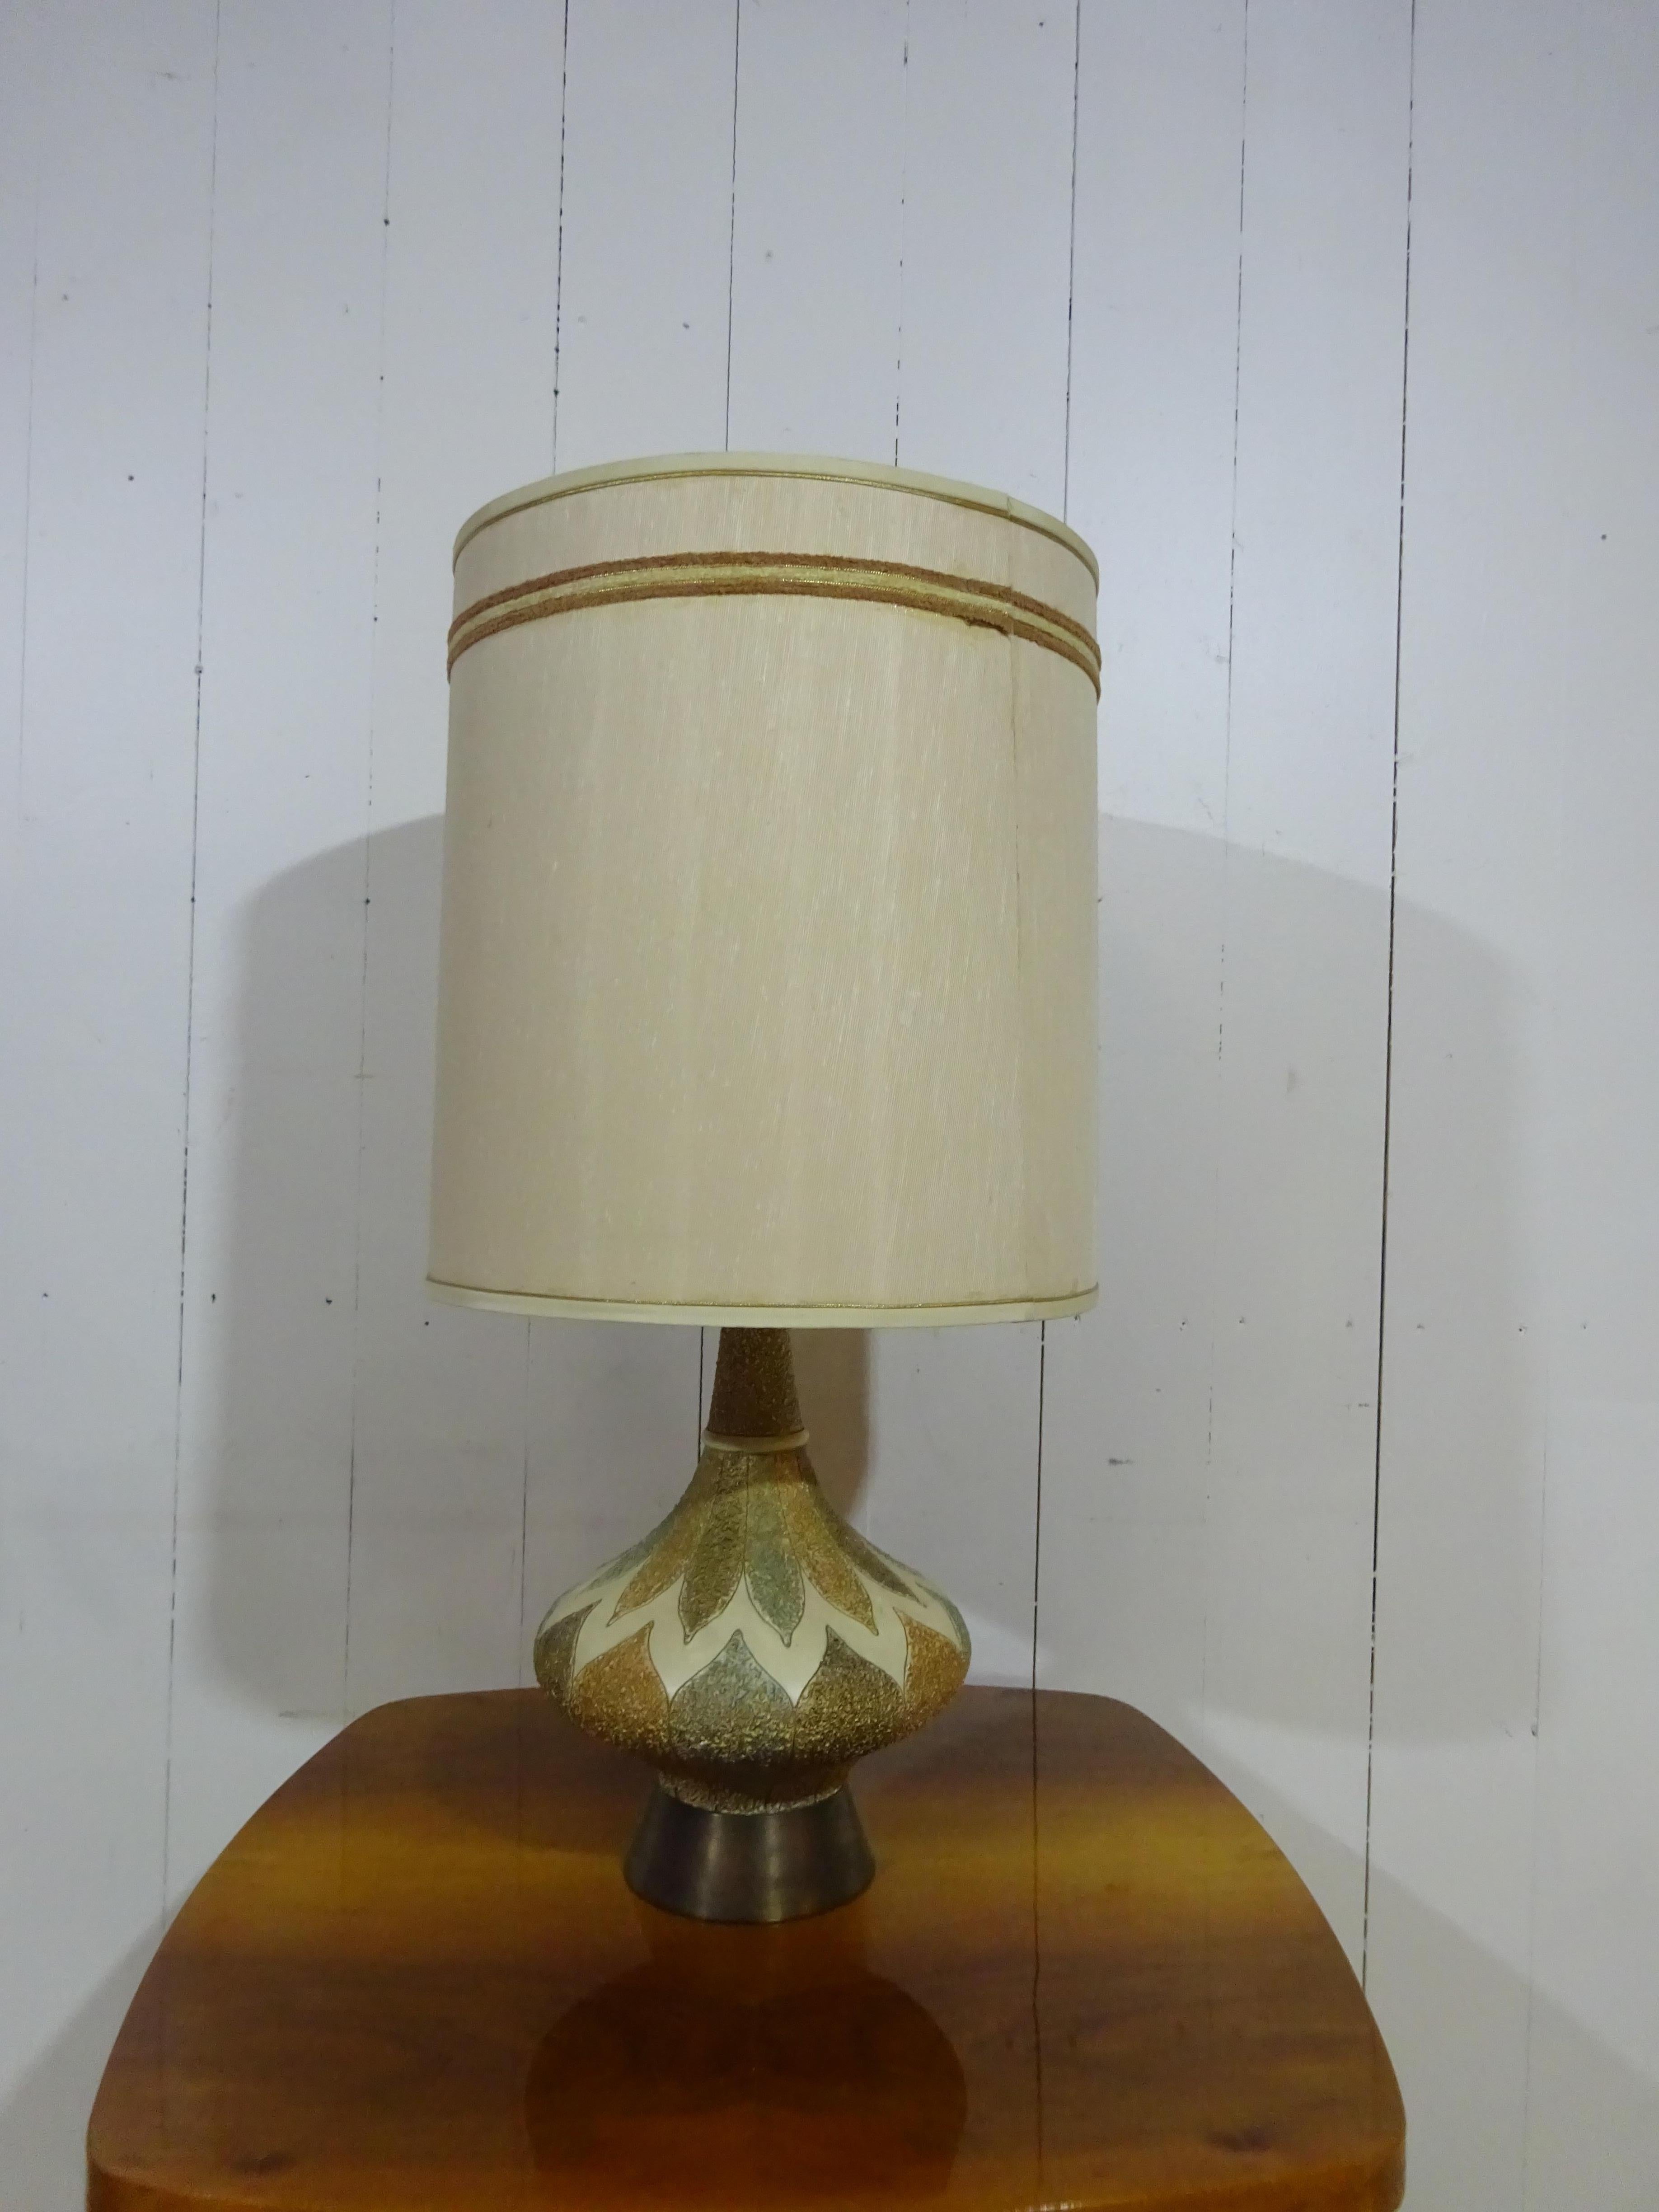 1950's Table Lamp with Patterned Porcelain Base In Good Condition For Sale In Tarleton, GB